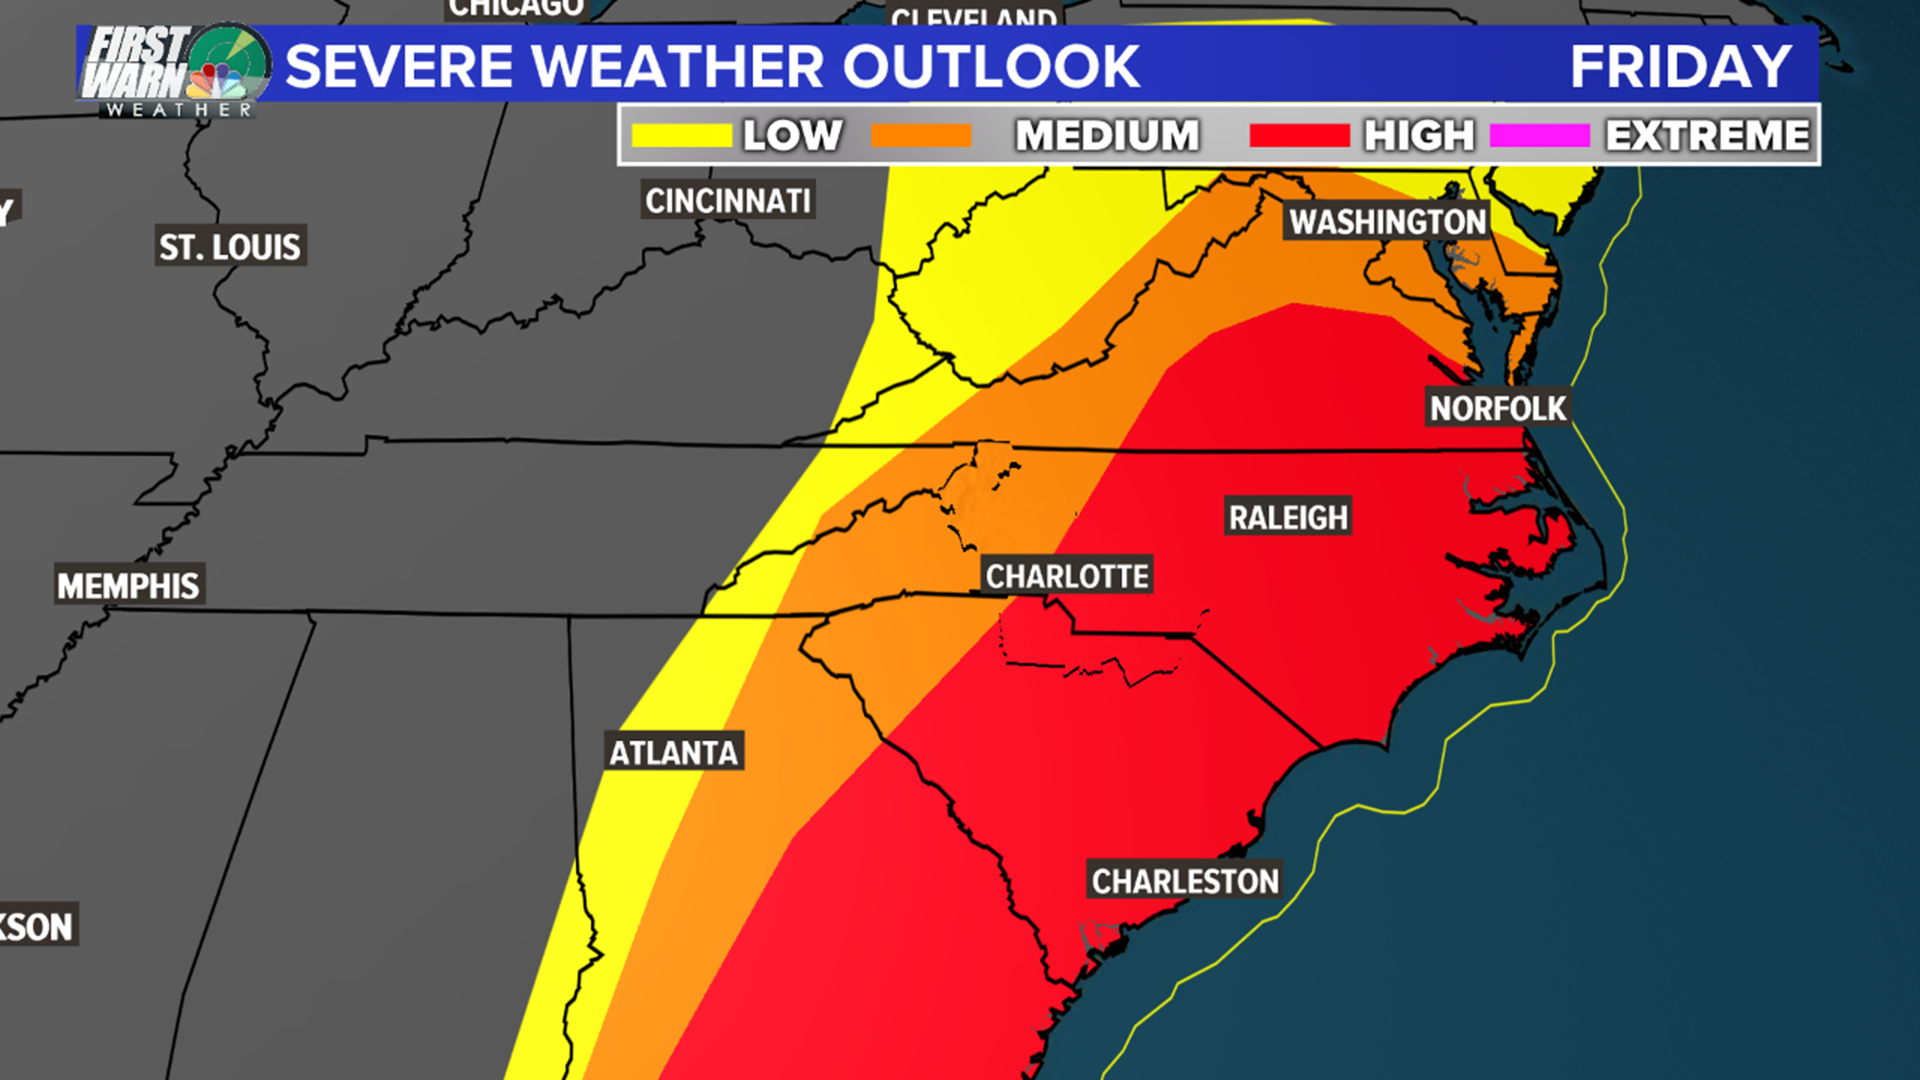 Threat for severe weather increases tomorrow with the primary threats being heavy rain and damaging winds. We'll also have to watch for hail and an isolated, brief tornado.